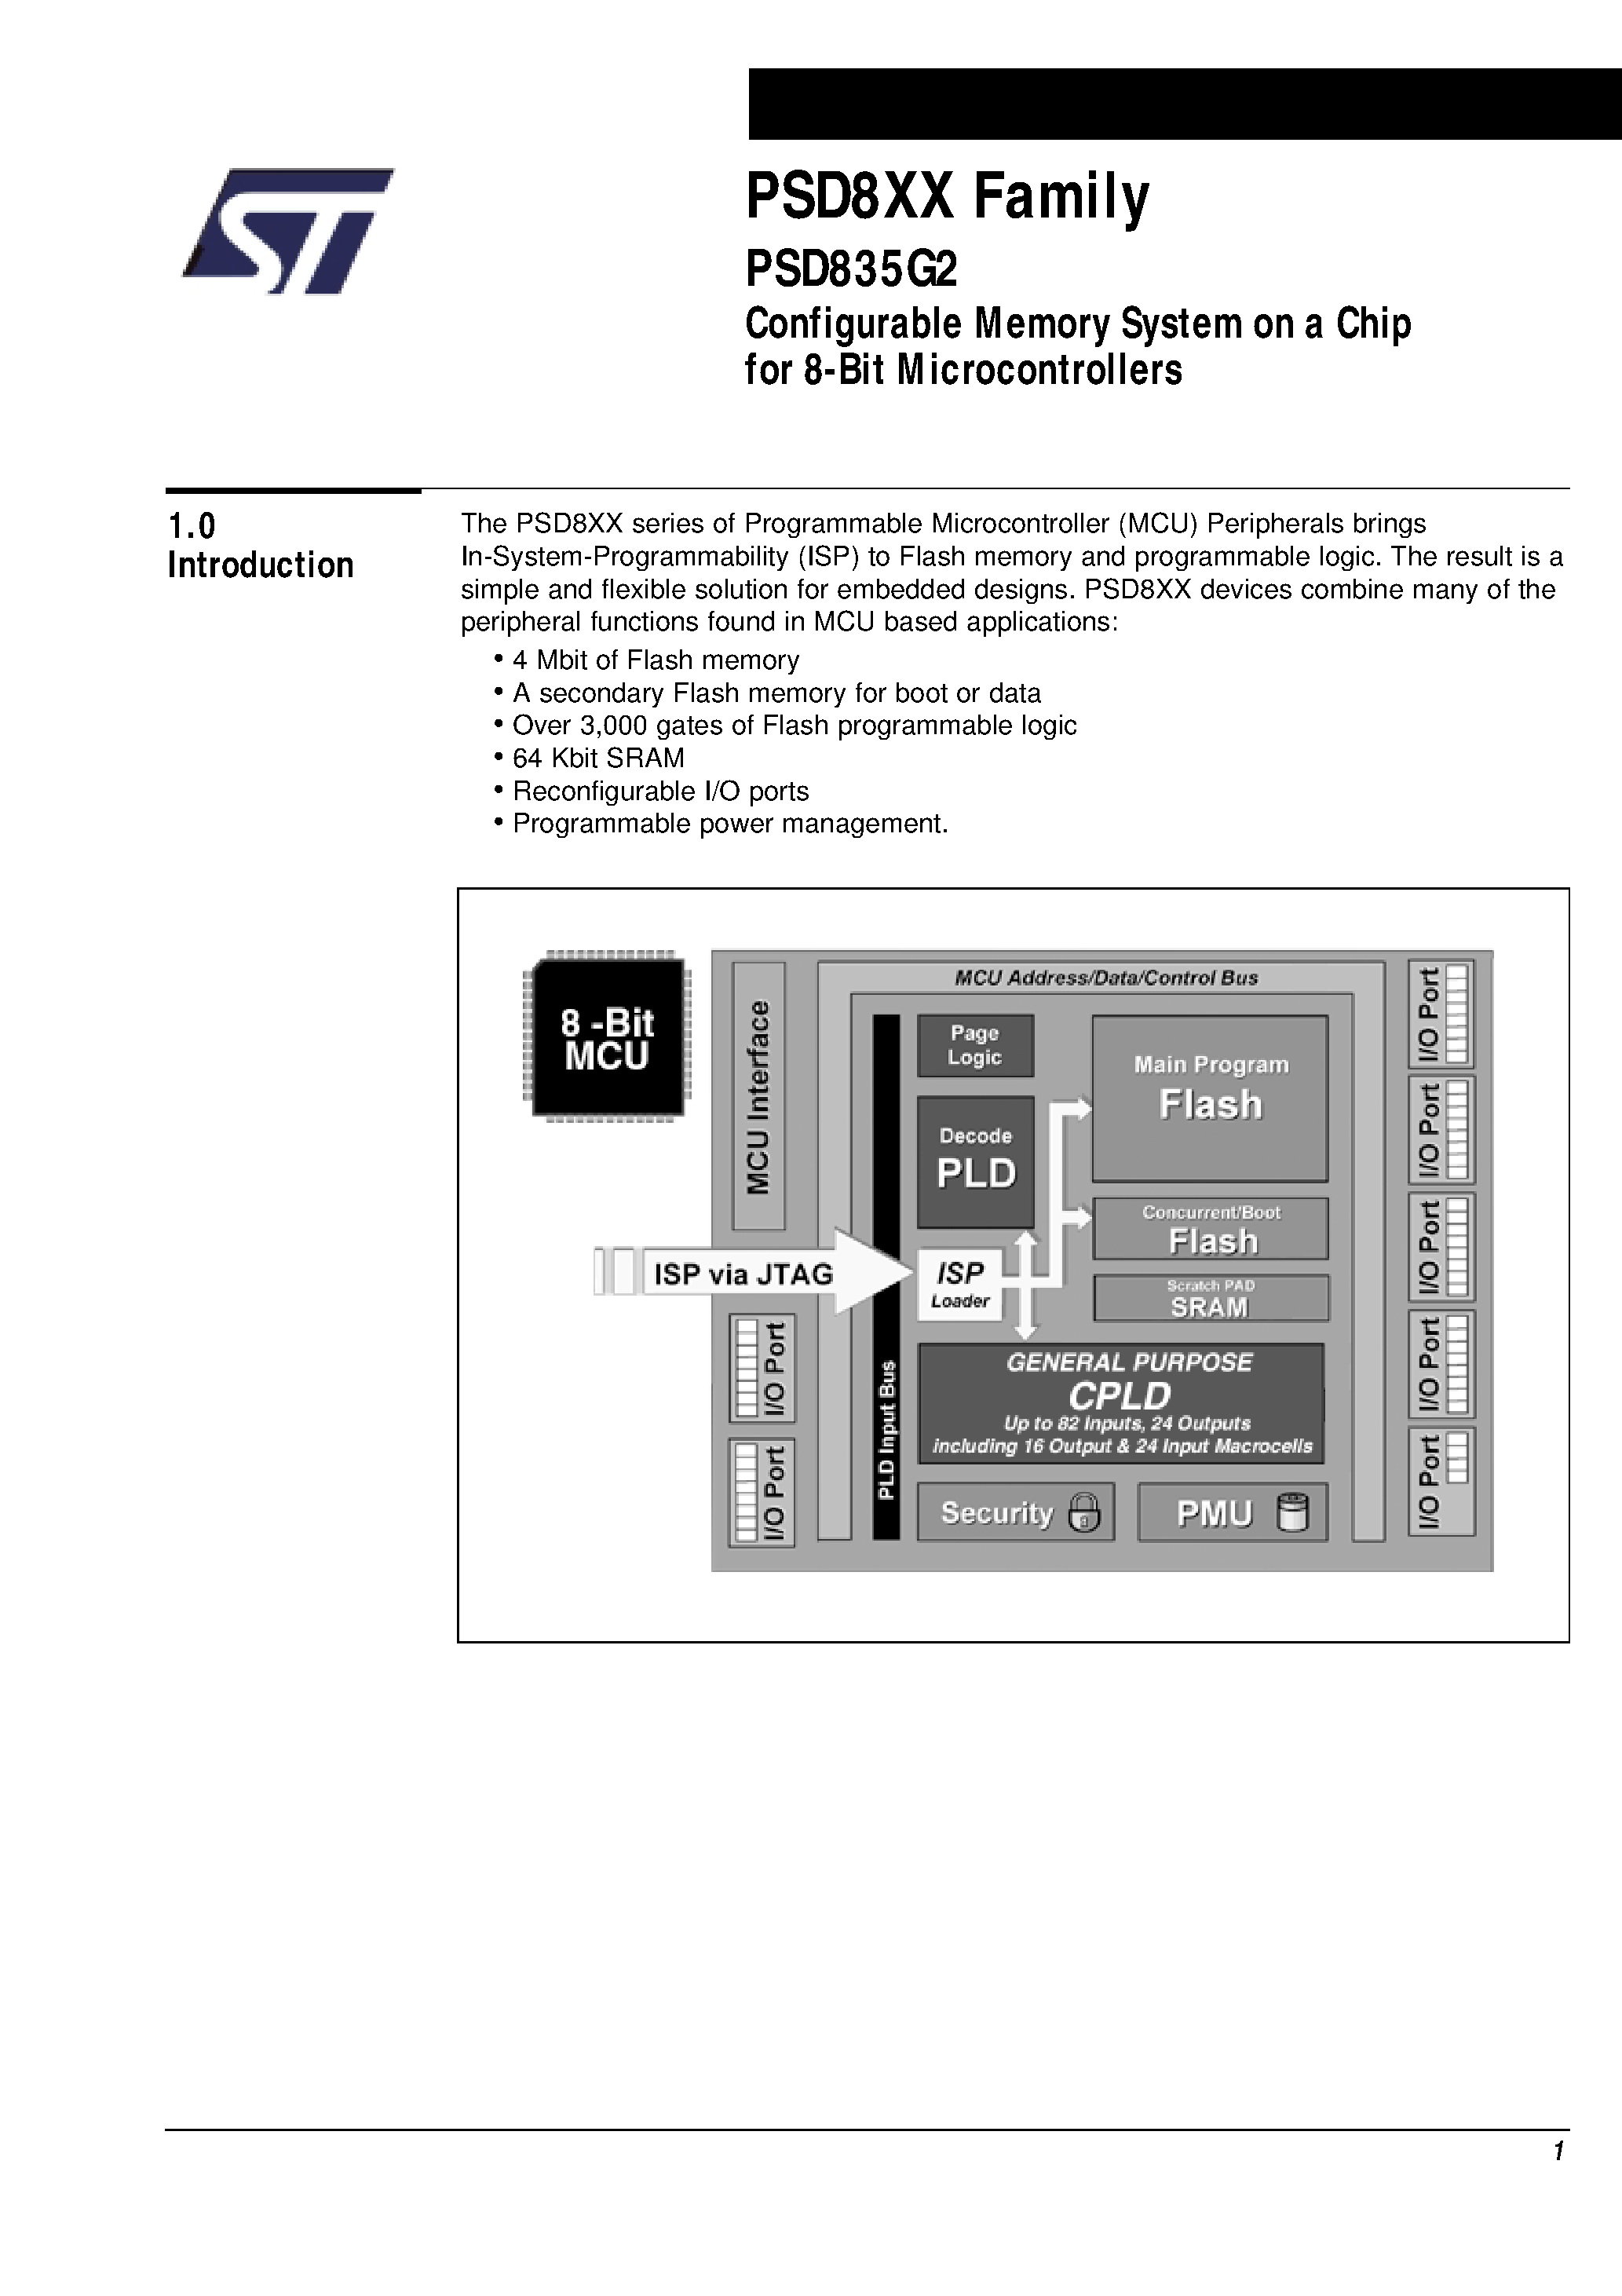 Datasheet PSD835F1V-A-15U - Configurable Memory System on a Chip for 8-Bit Microcontrollers page 2